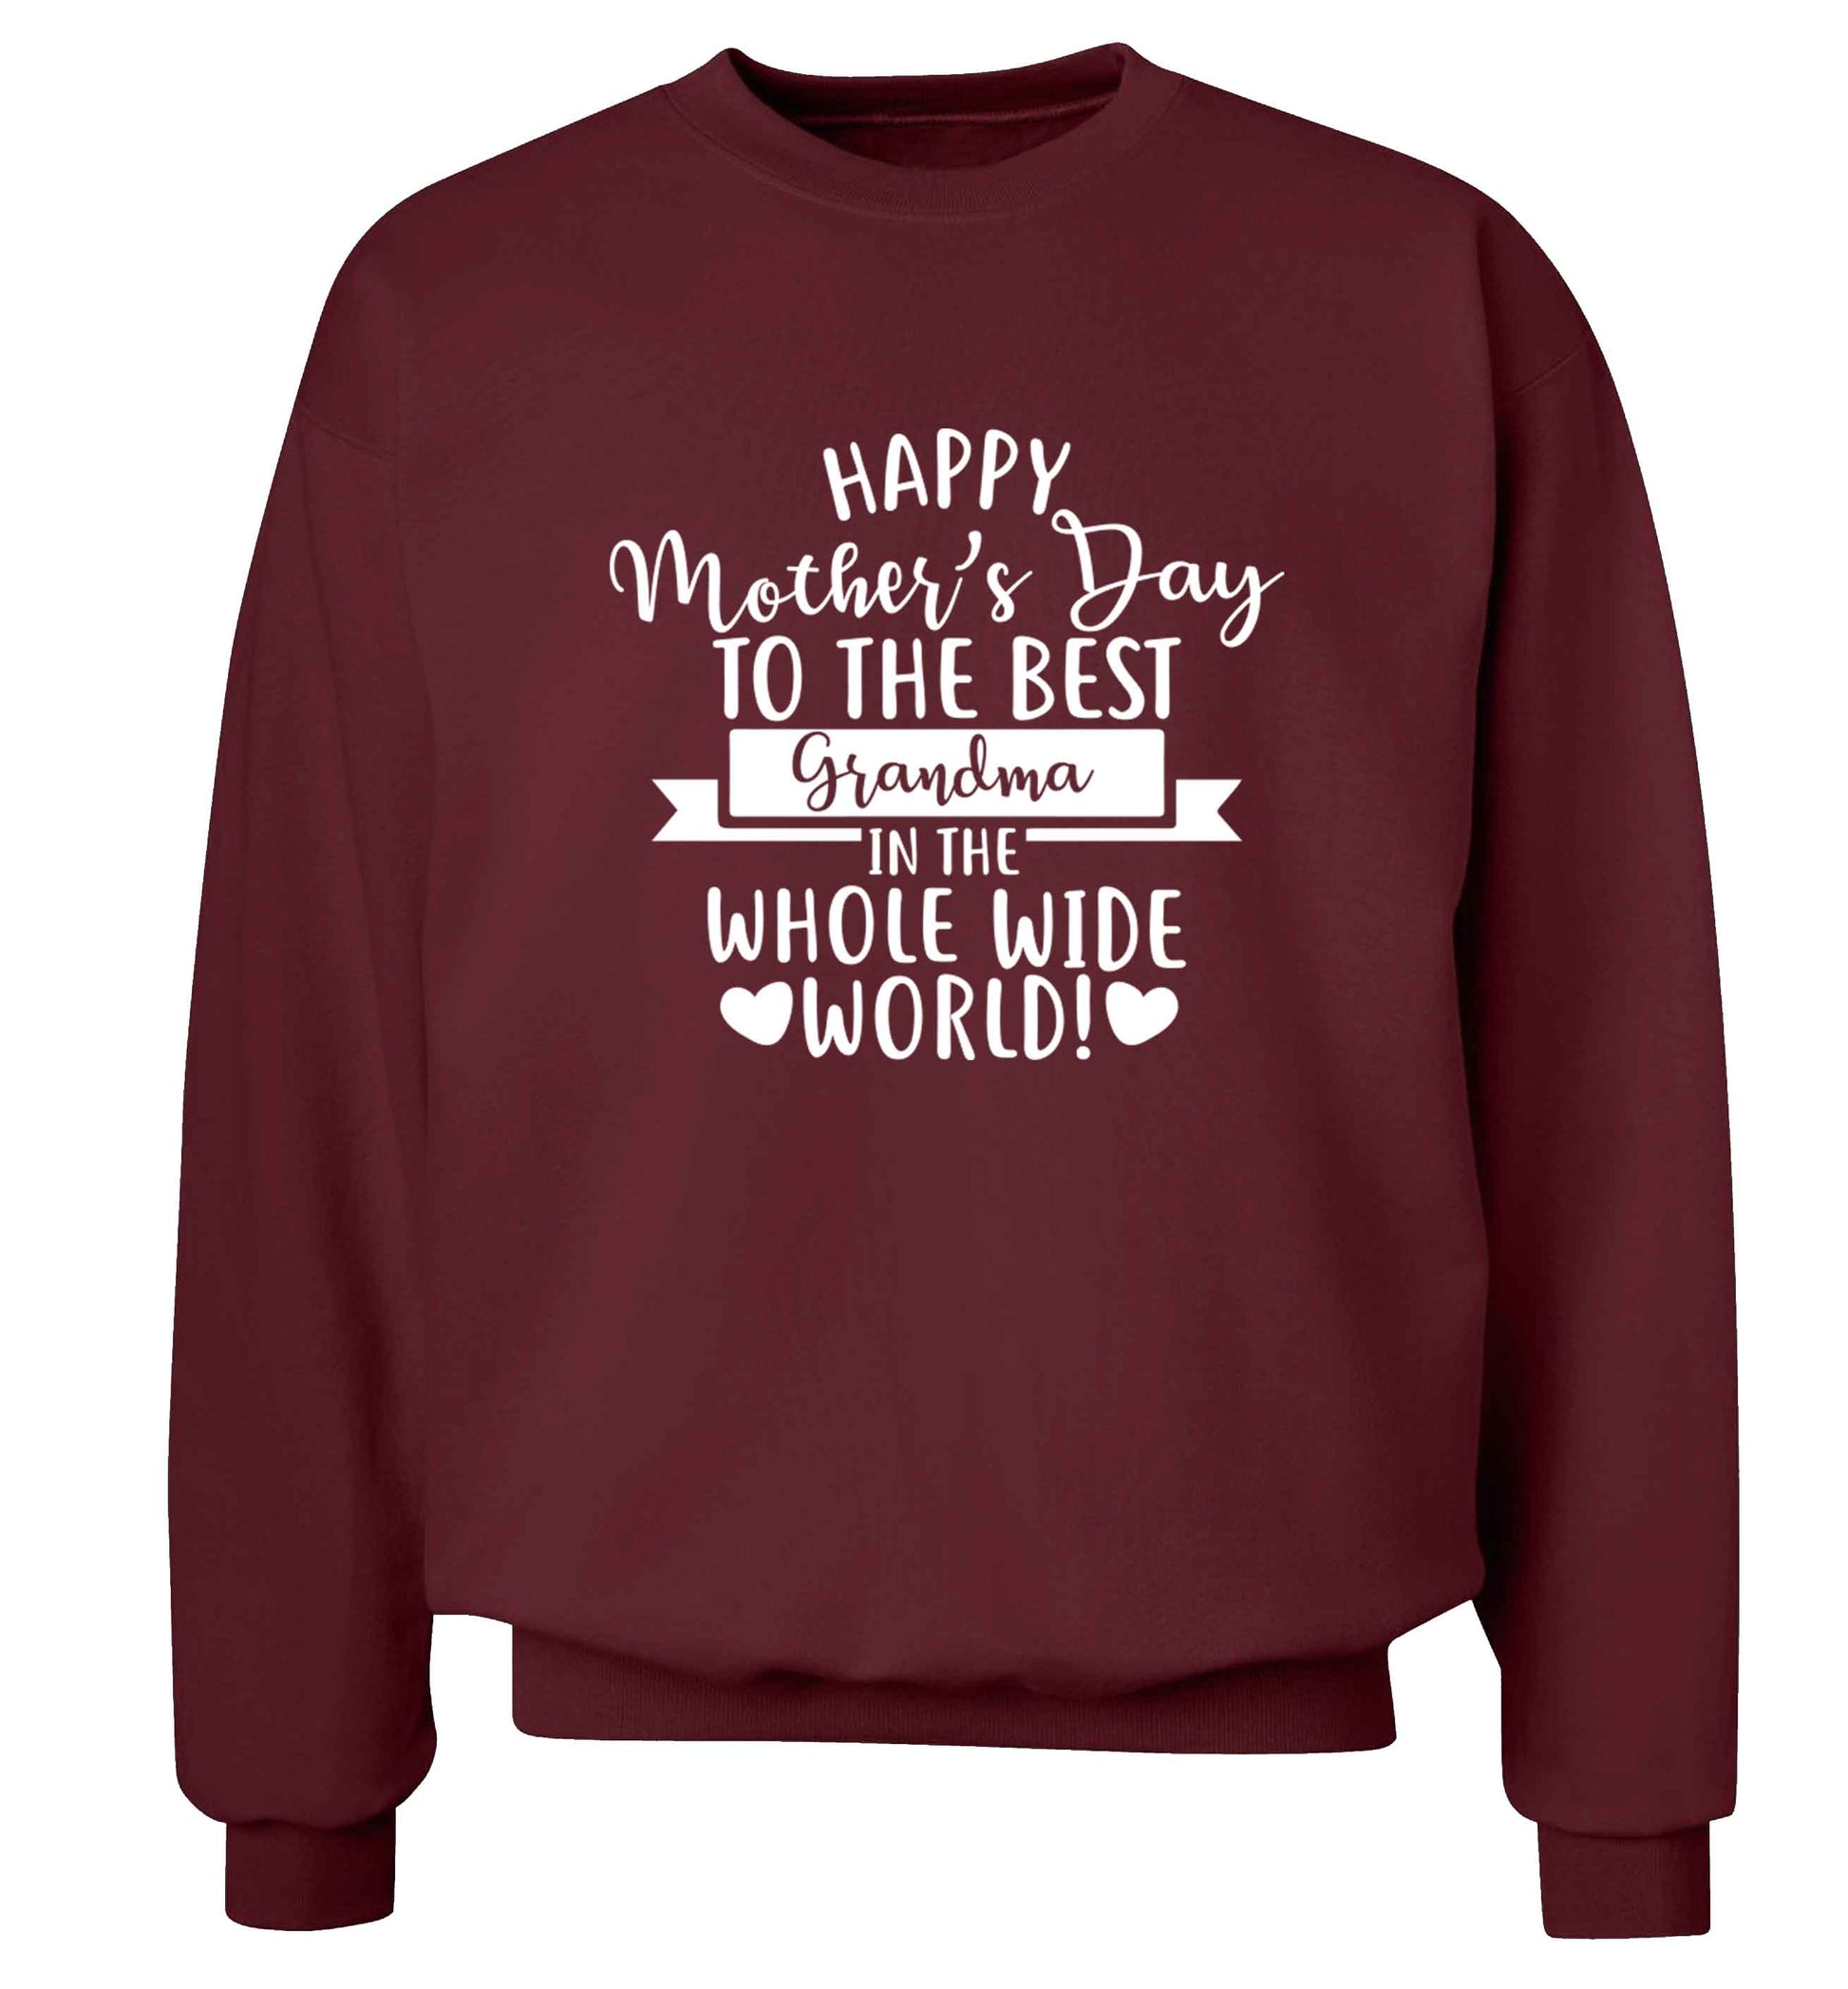 Happy mother's day to the best grandma in the world adult's unisex maroon sweater 2XL